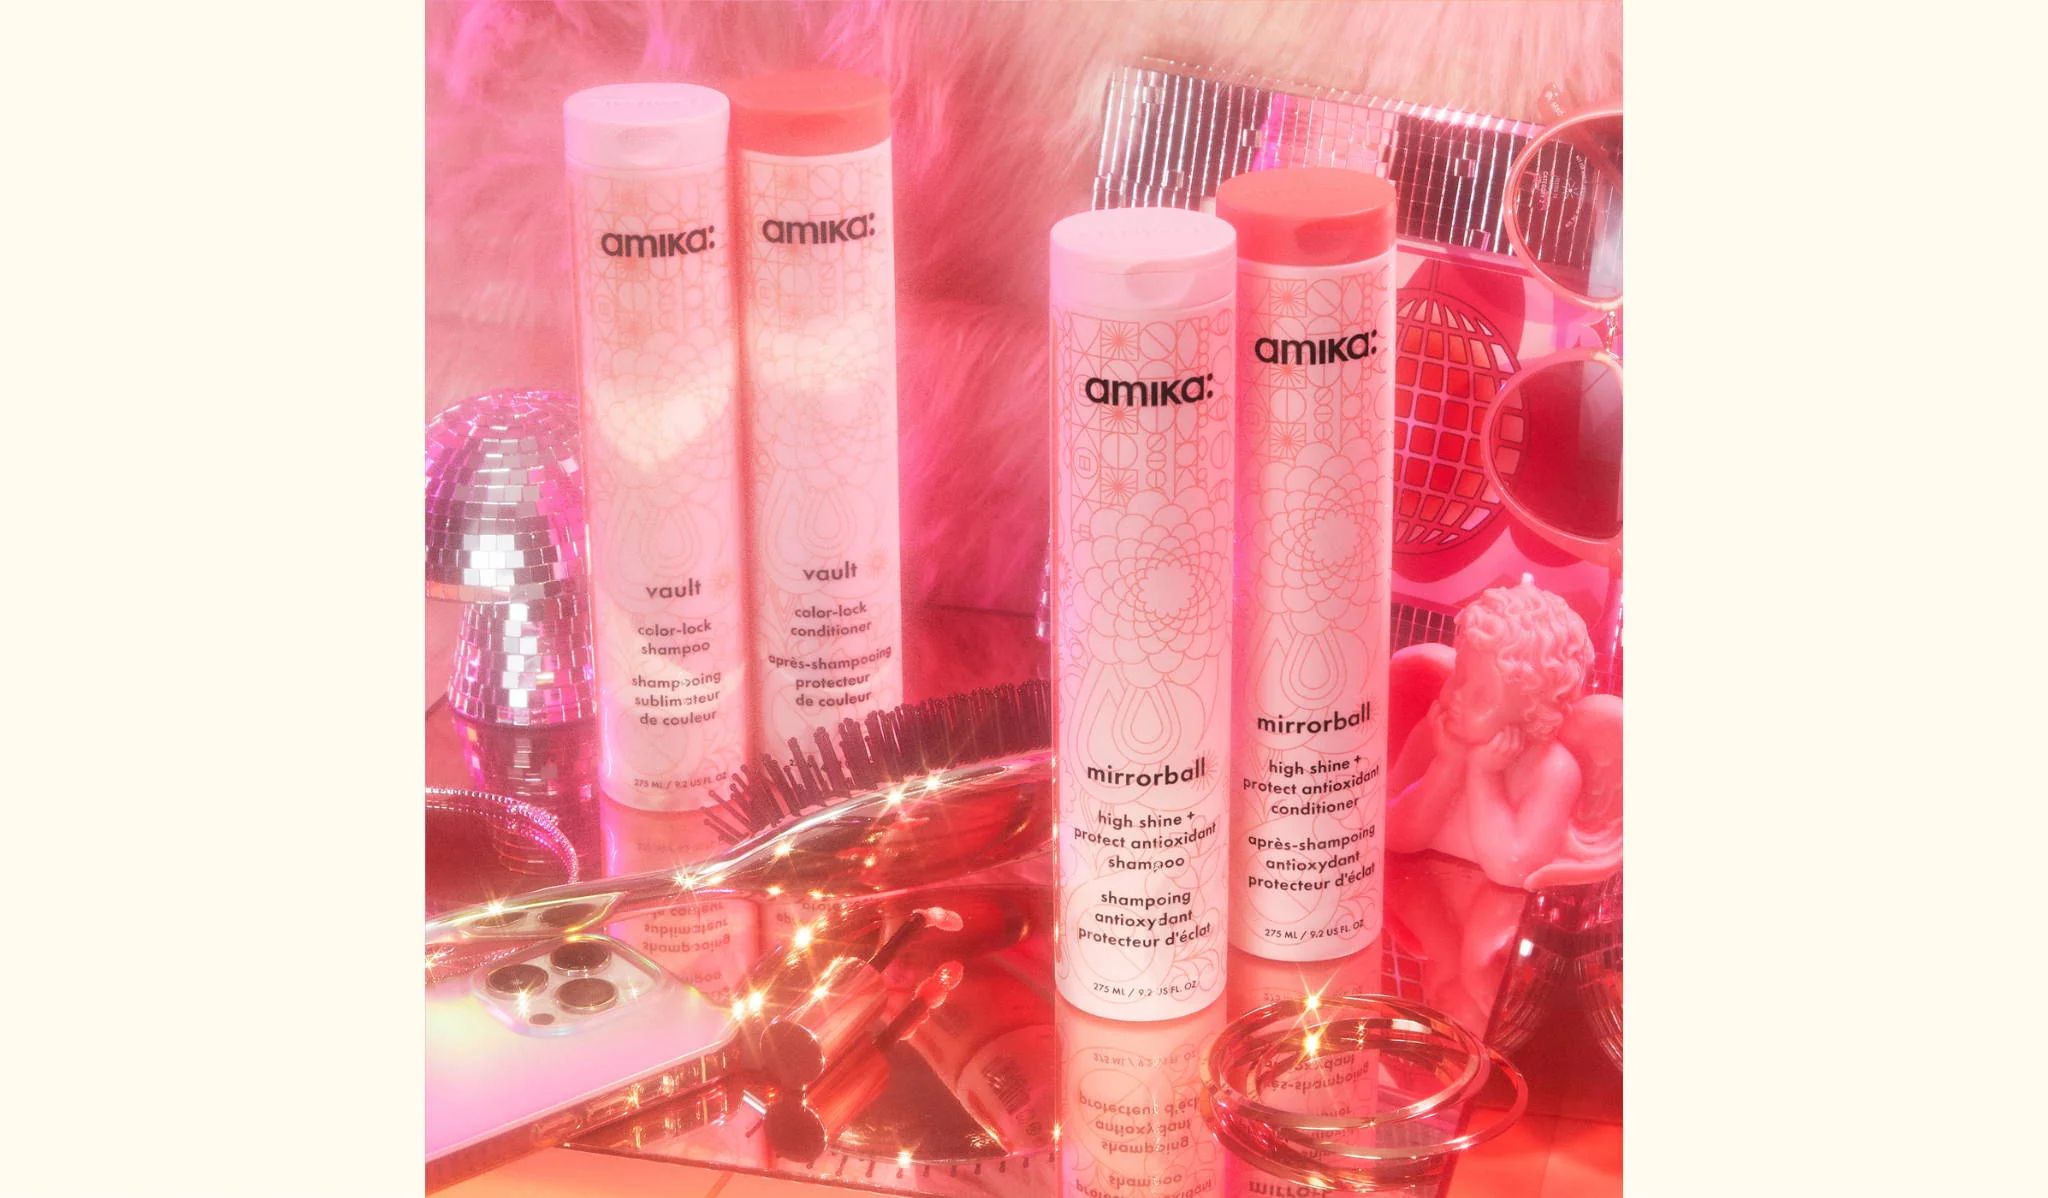 mirrorball high shine + protect antioxidant shampoo and conditioner